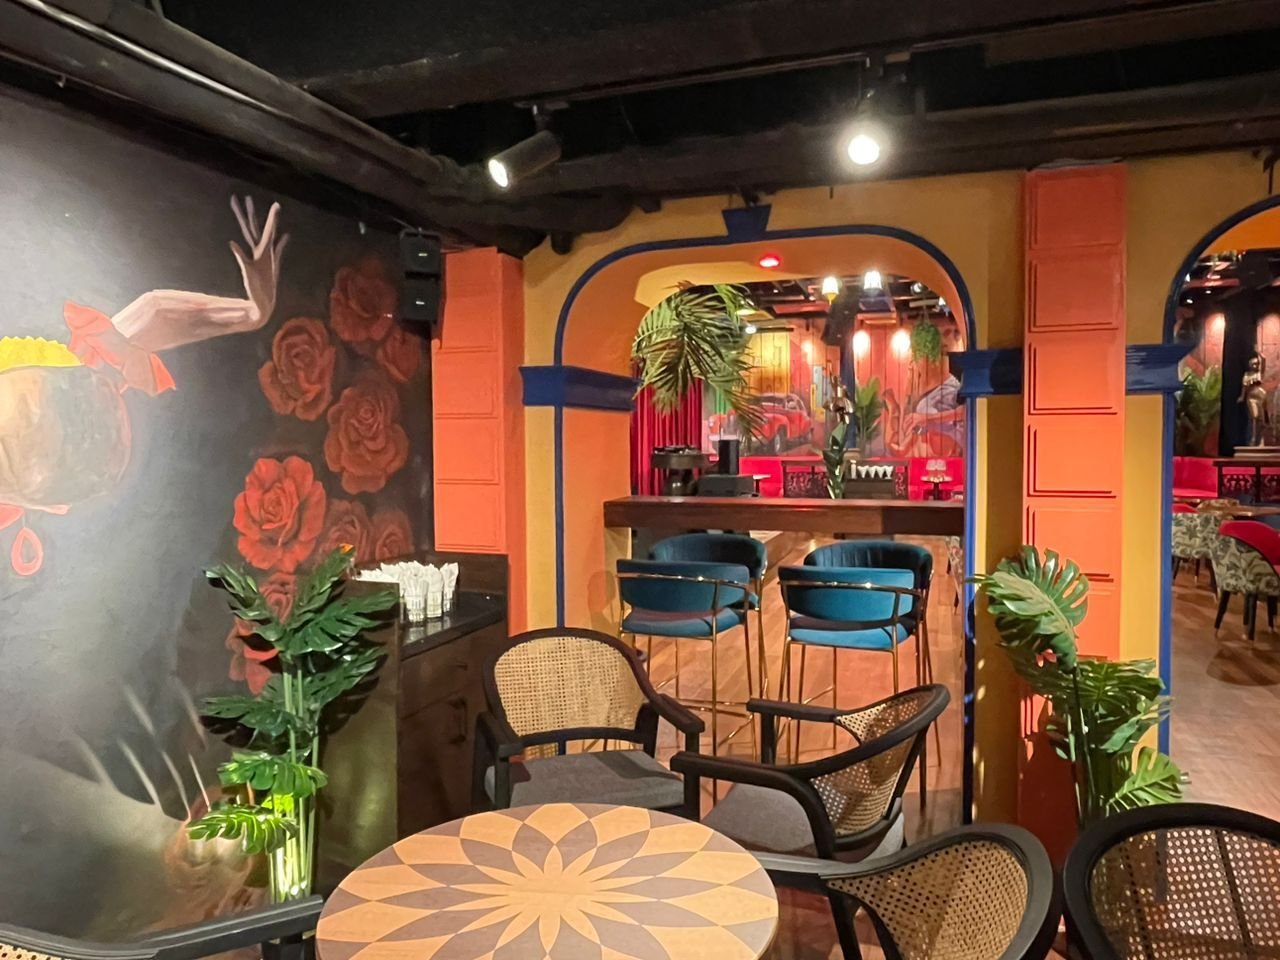 📍La Boca Malaysia! A Latin American restaurant with authentic live music. Working with K-arrays distributor @Nextrend Systems Sdn Bhd, KGEAR was chosen for the sound system. 

With multiple demands for the space, the client opted for the GH line spe